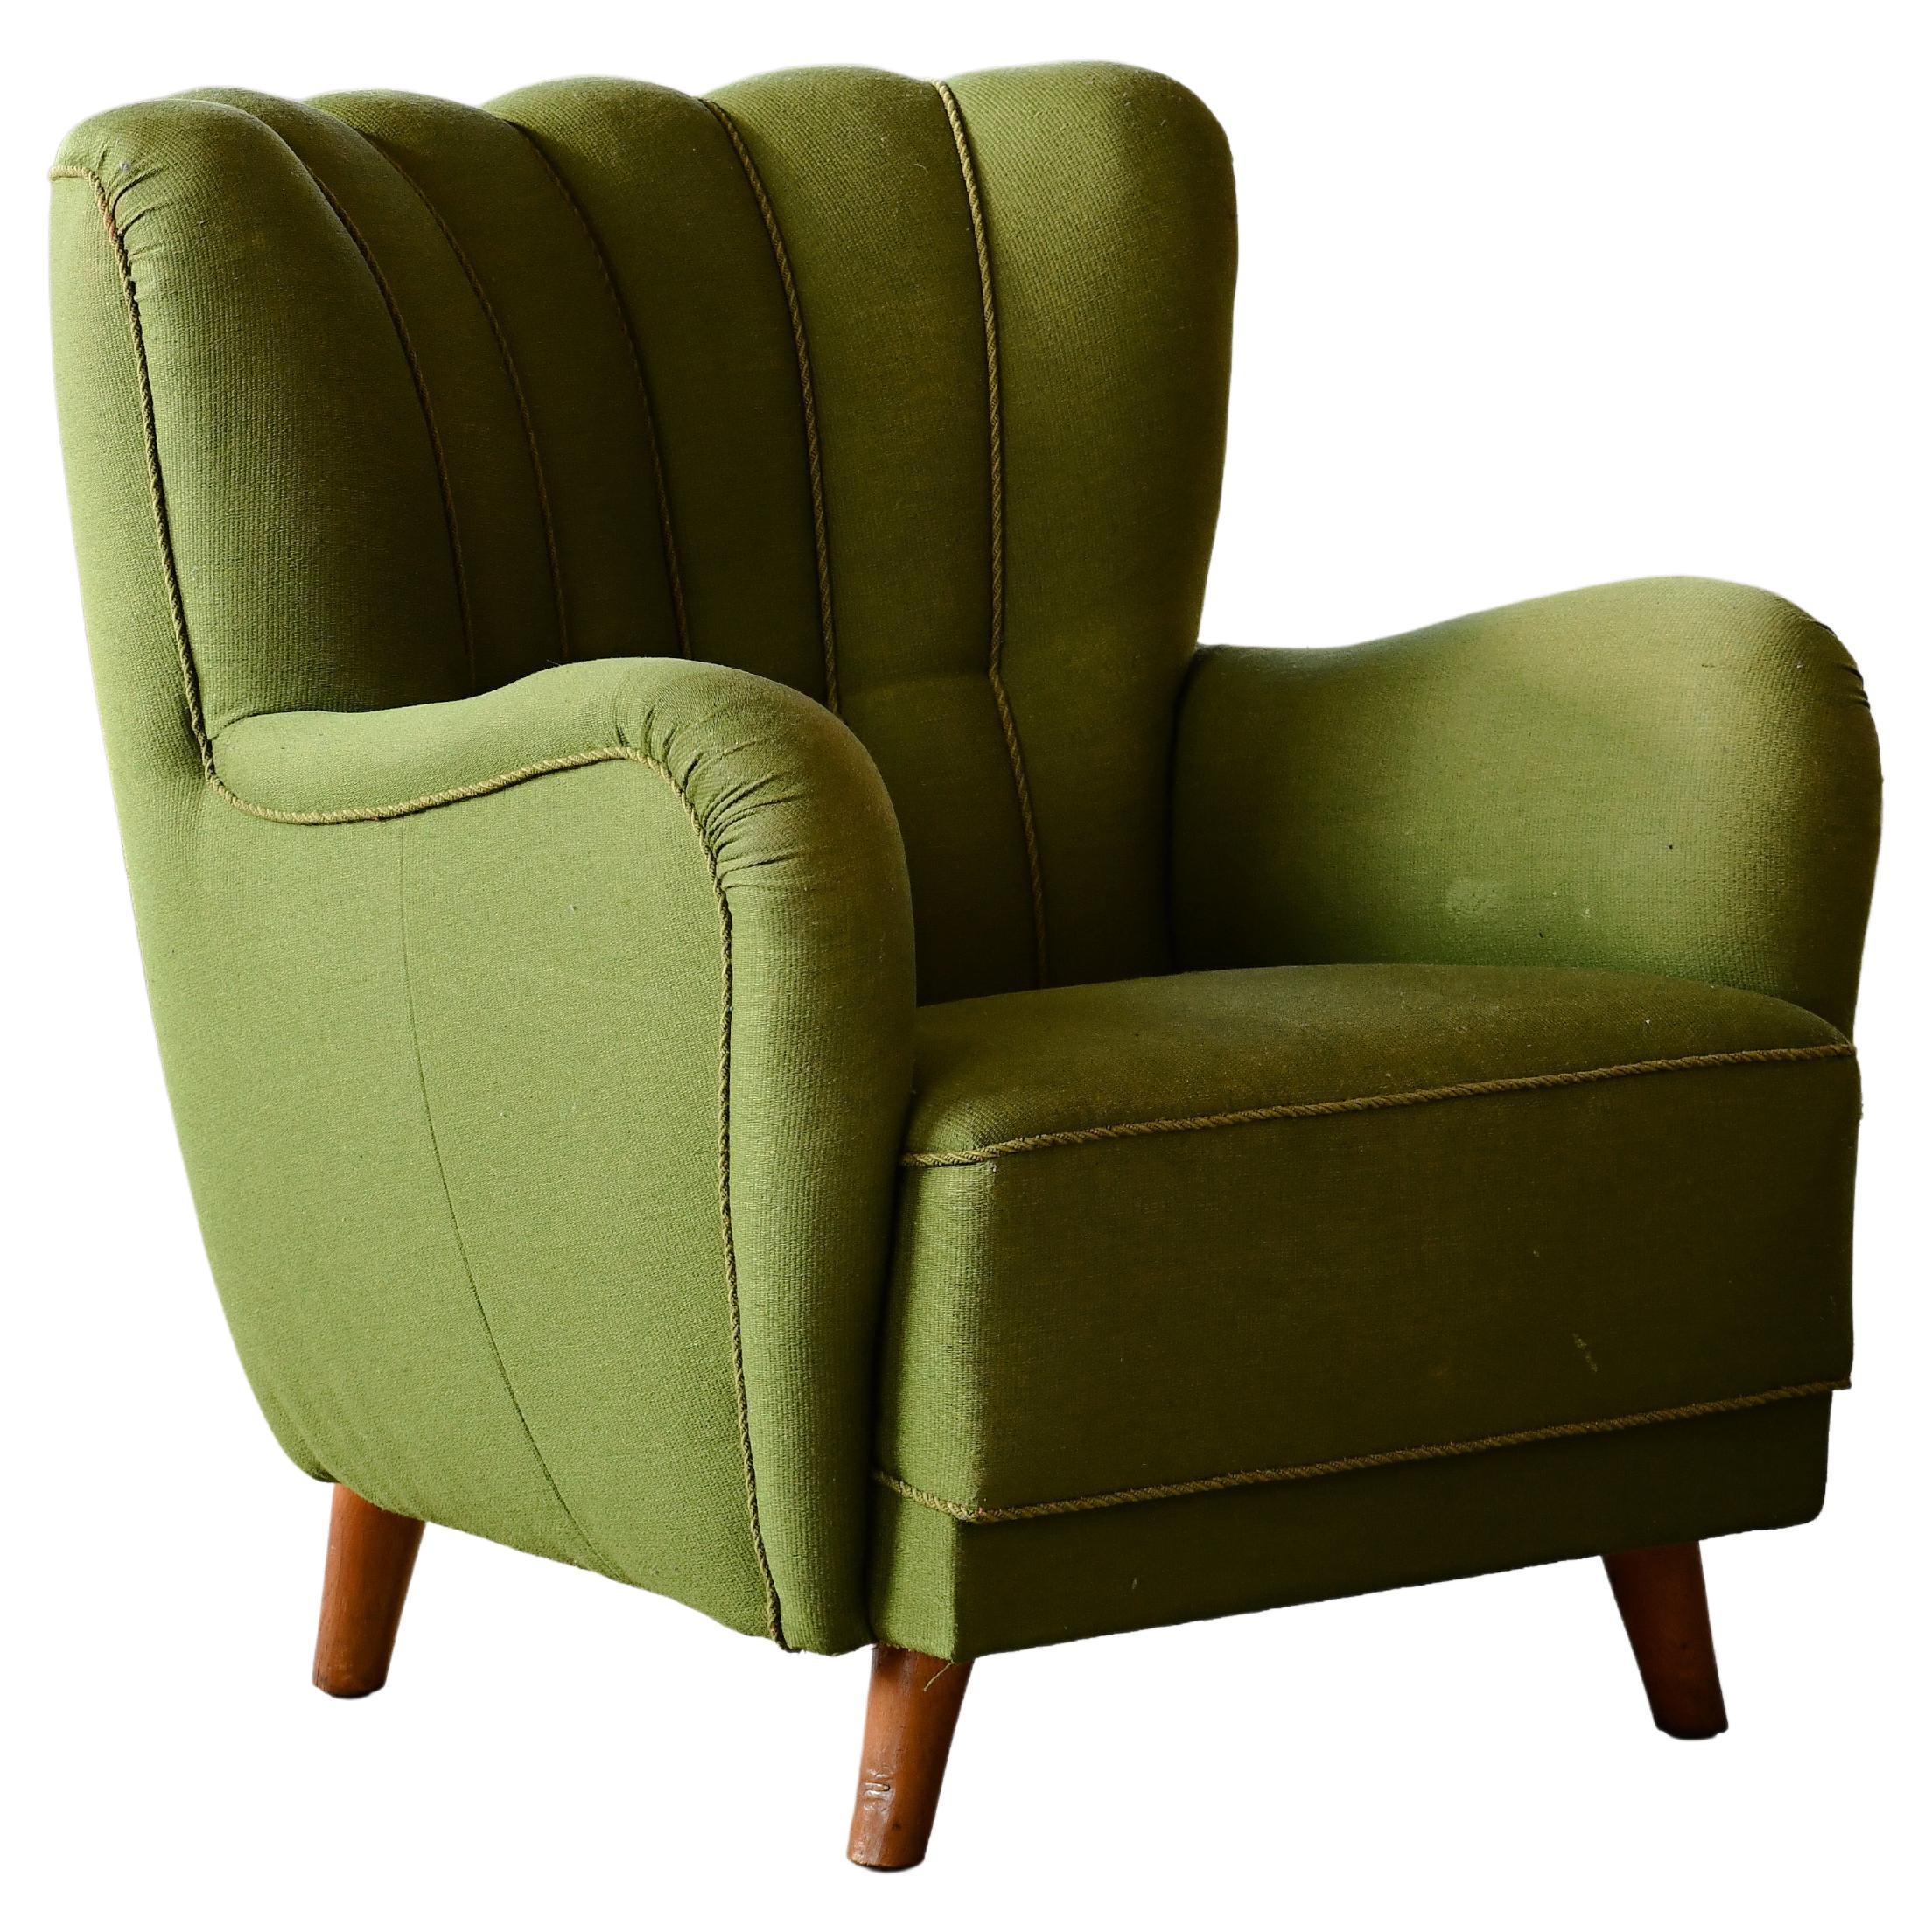 Danish 1940s Channel Back Low Back Lounge Chair in Emerald Green Wool For Sale